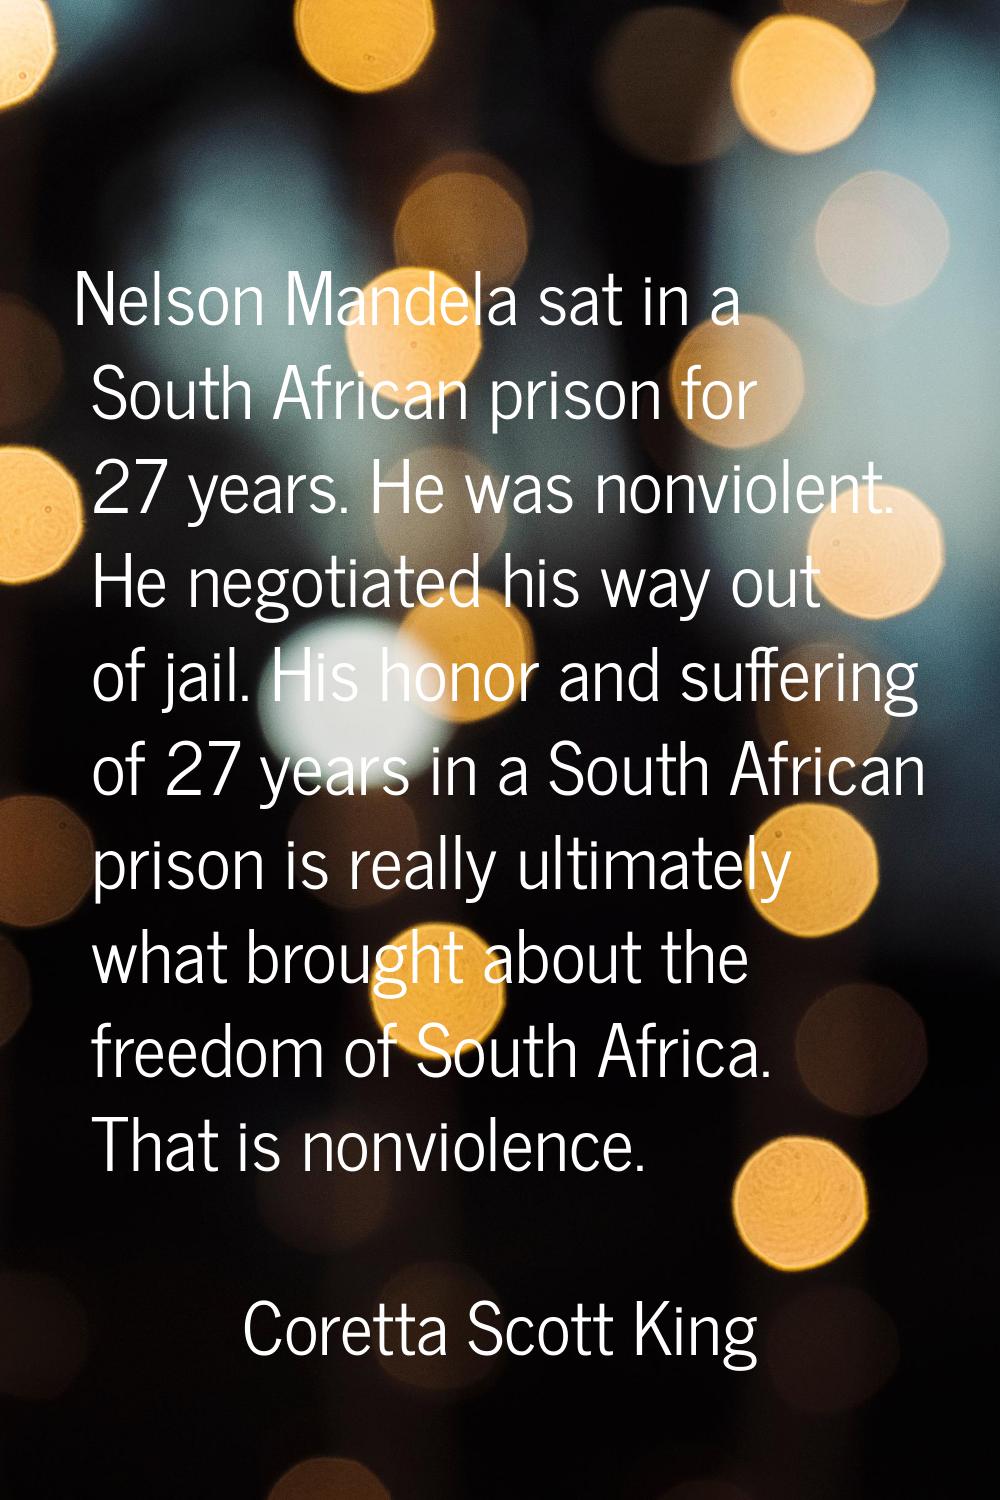 Nelson Mandela sat in a South African prison for 27 years. He was nonviolent. He negotiated his way